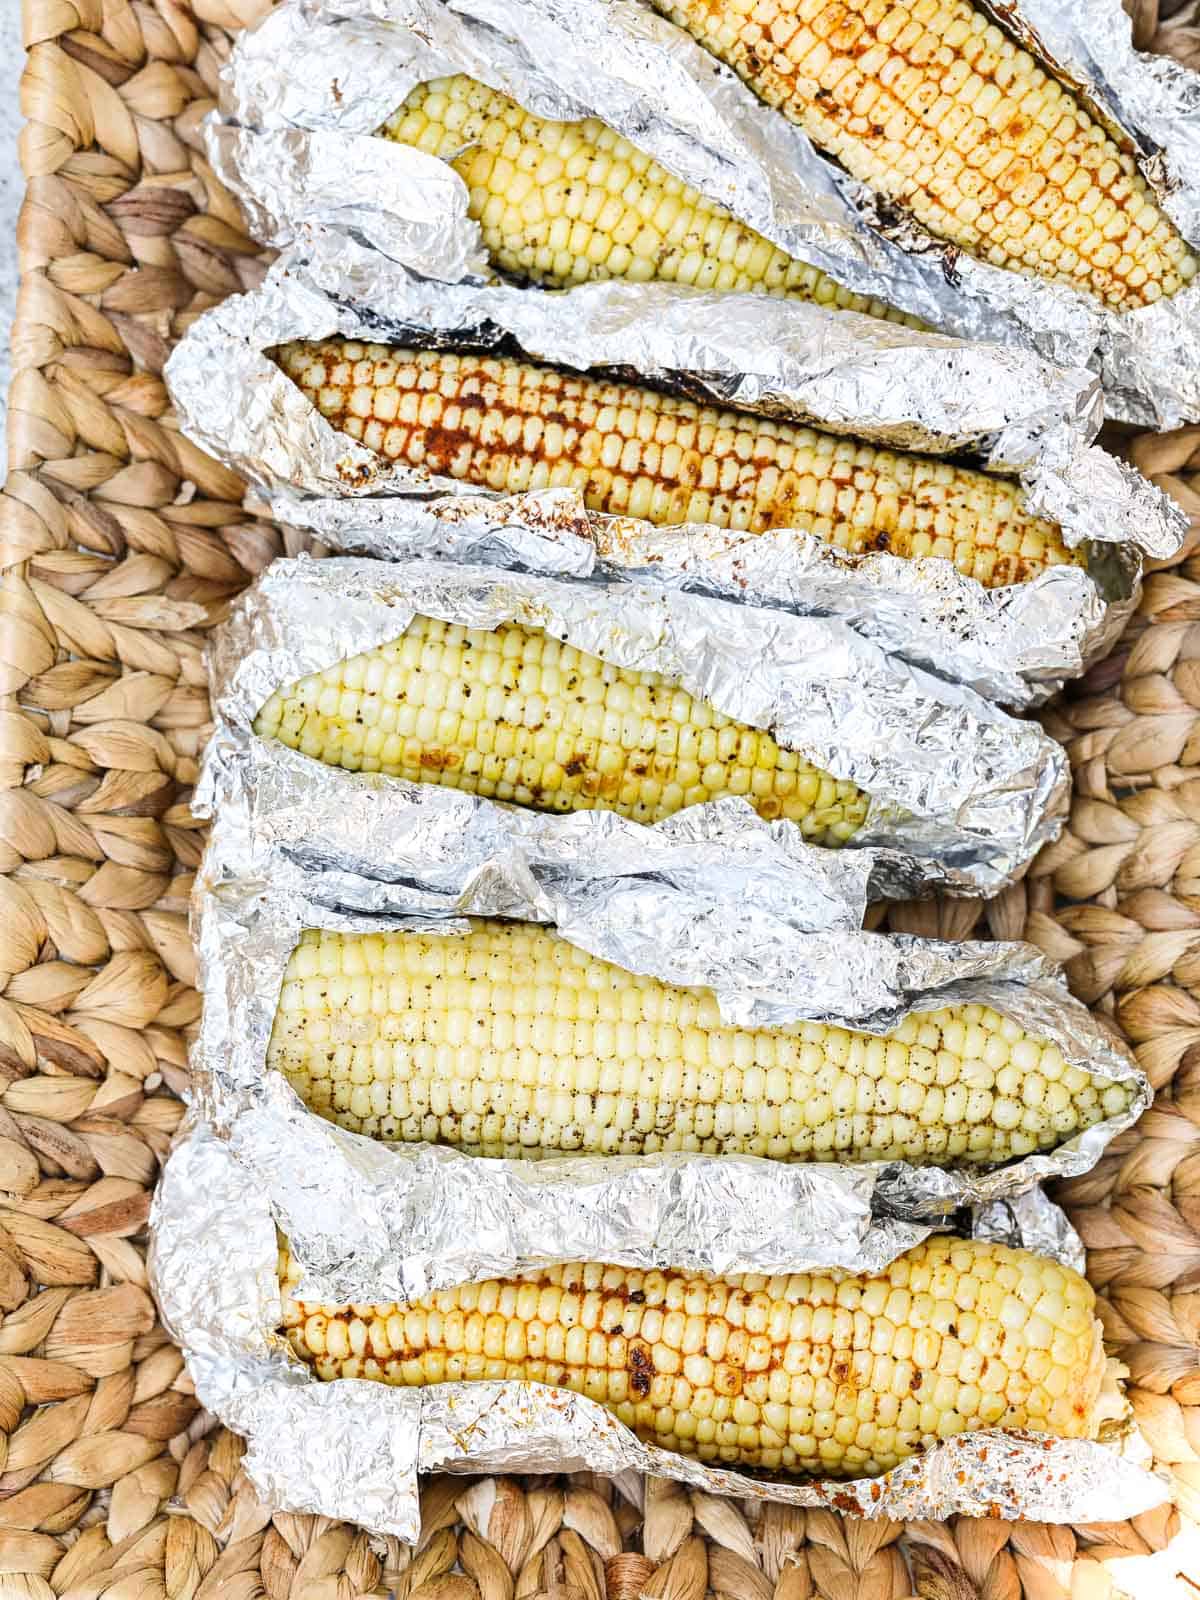 A larger serving basket with Grilled Corn unwrapped in foil laying in the basket before eating.